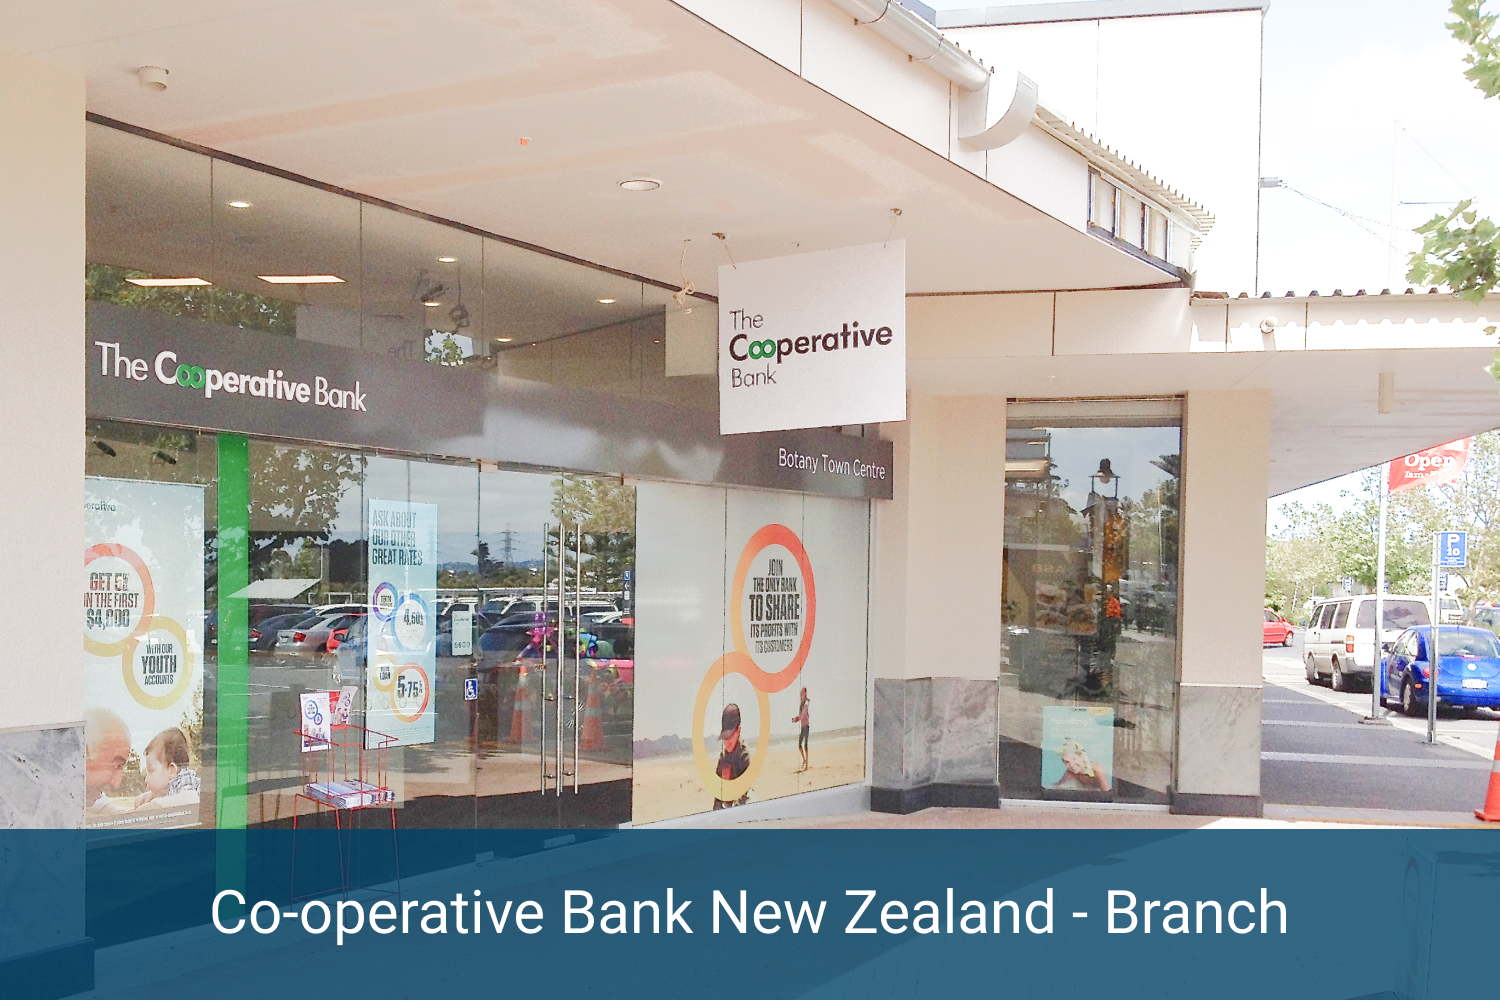 Co-operative Bank New Zealand - Branch